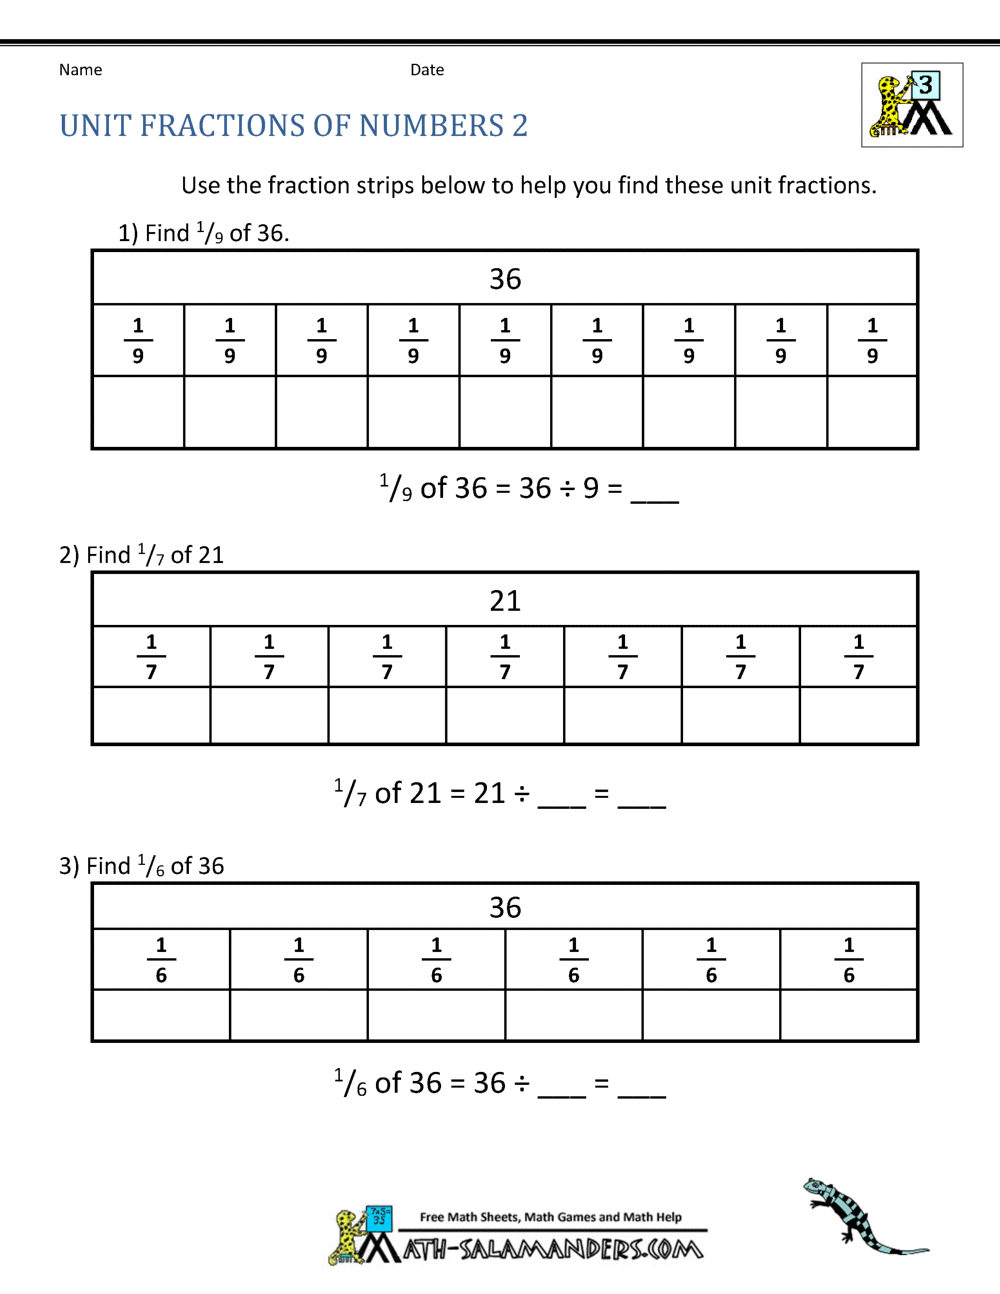 unit-fraction-of-numbers